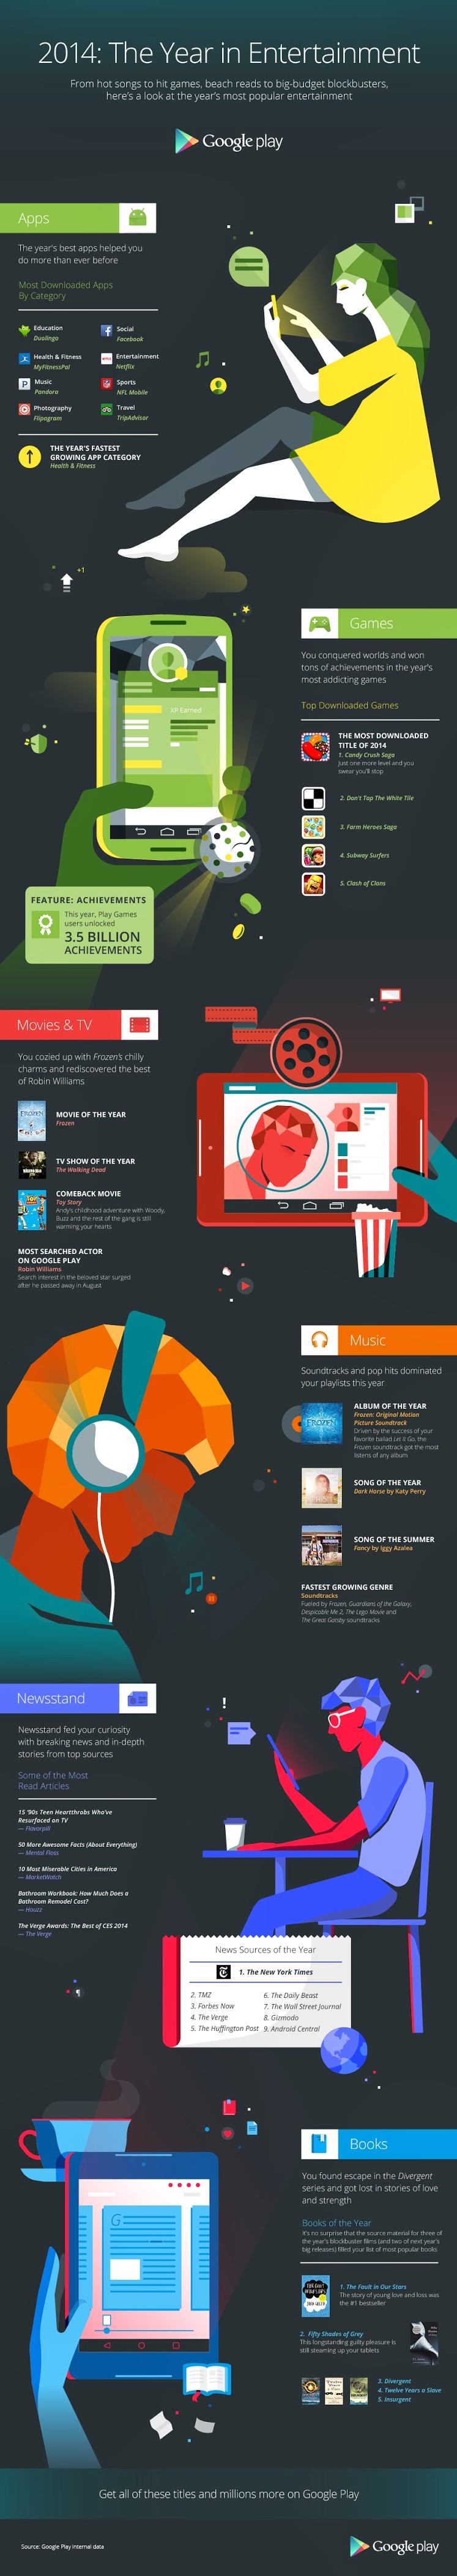 Google Play - End of Year Infographic - 2014 - FINAL